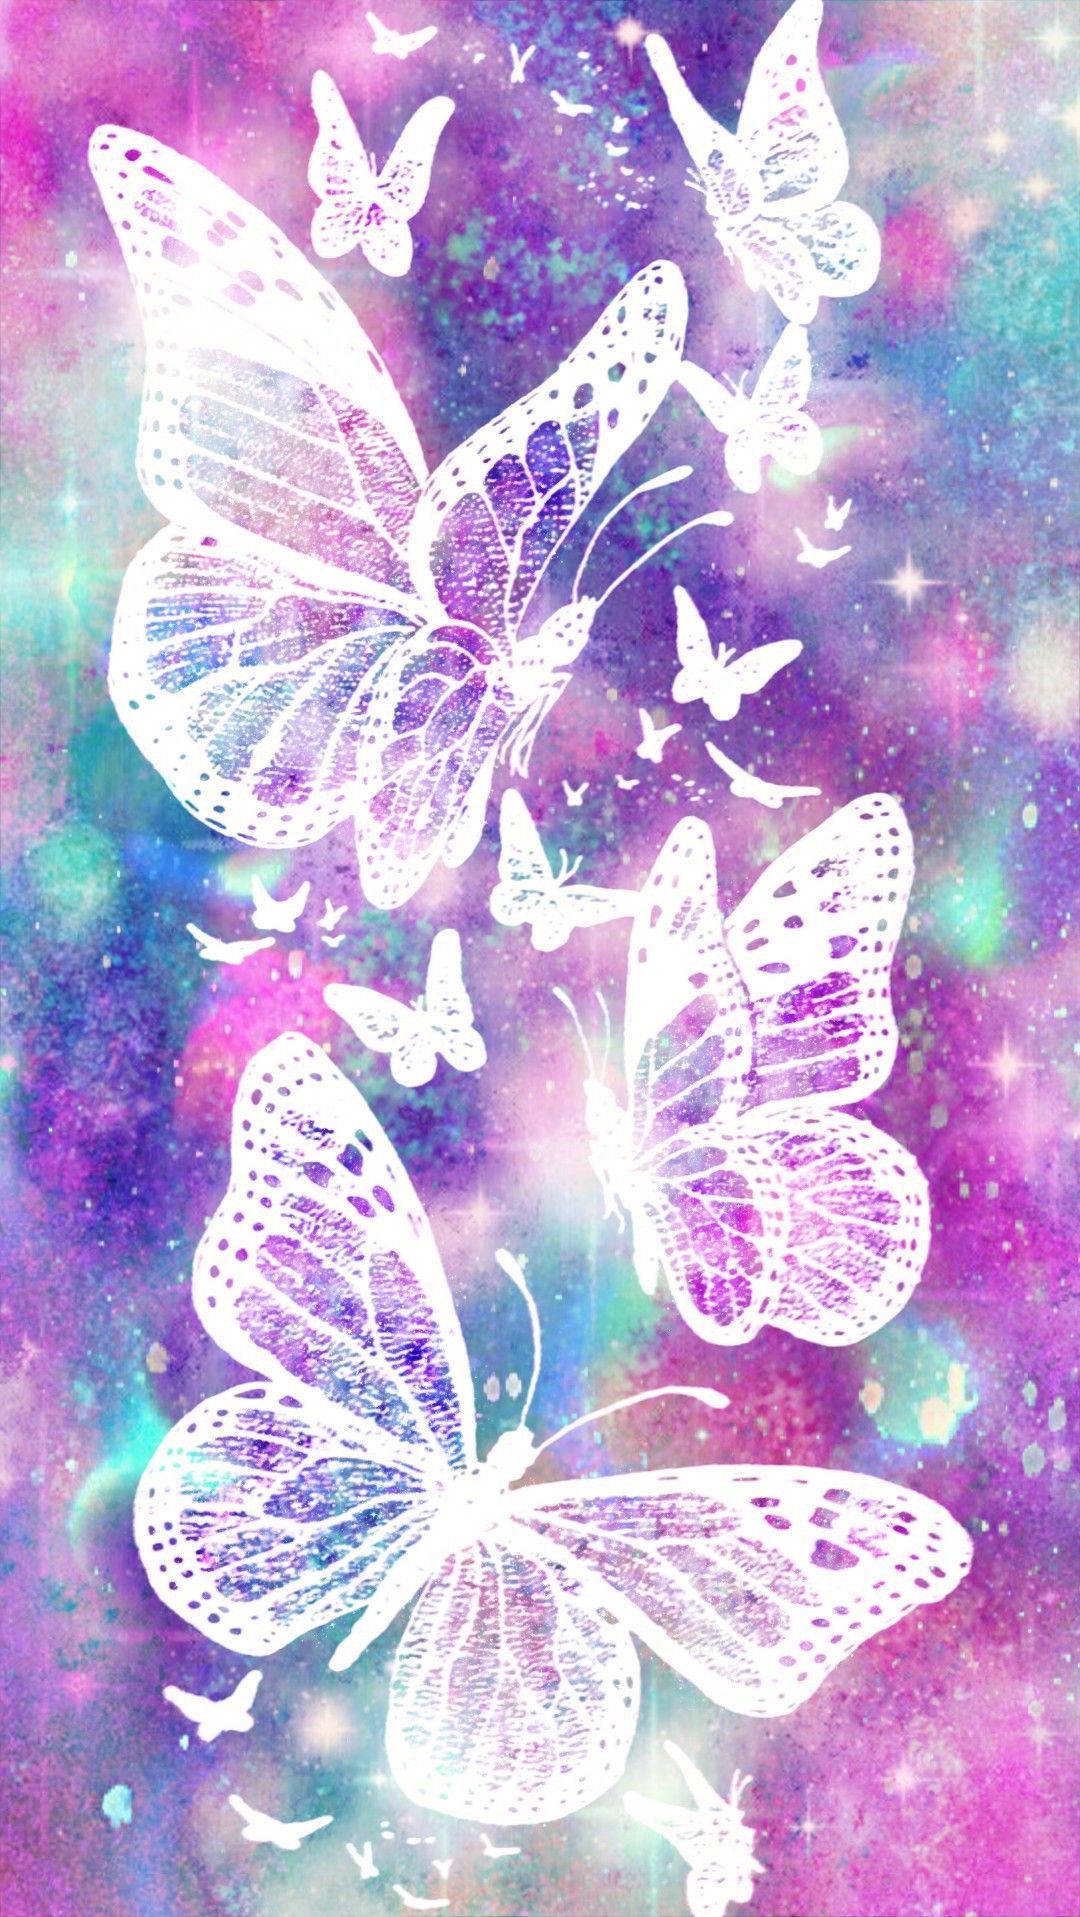 Glistening Butterflies Galaxy, made by me